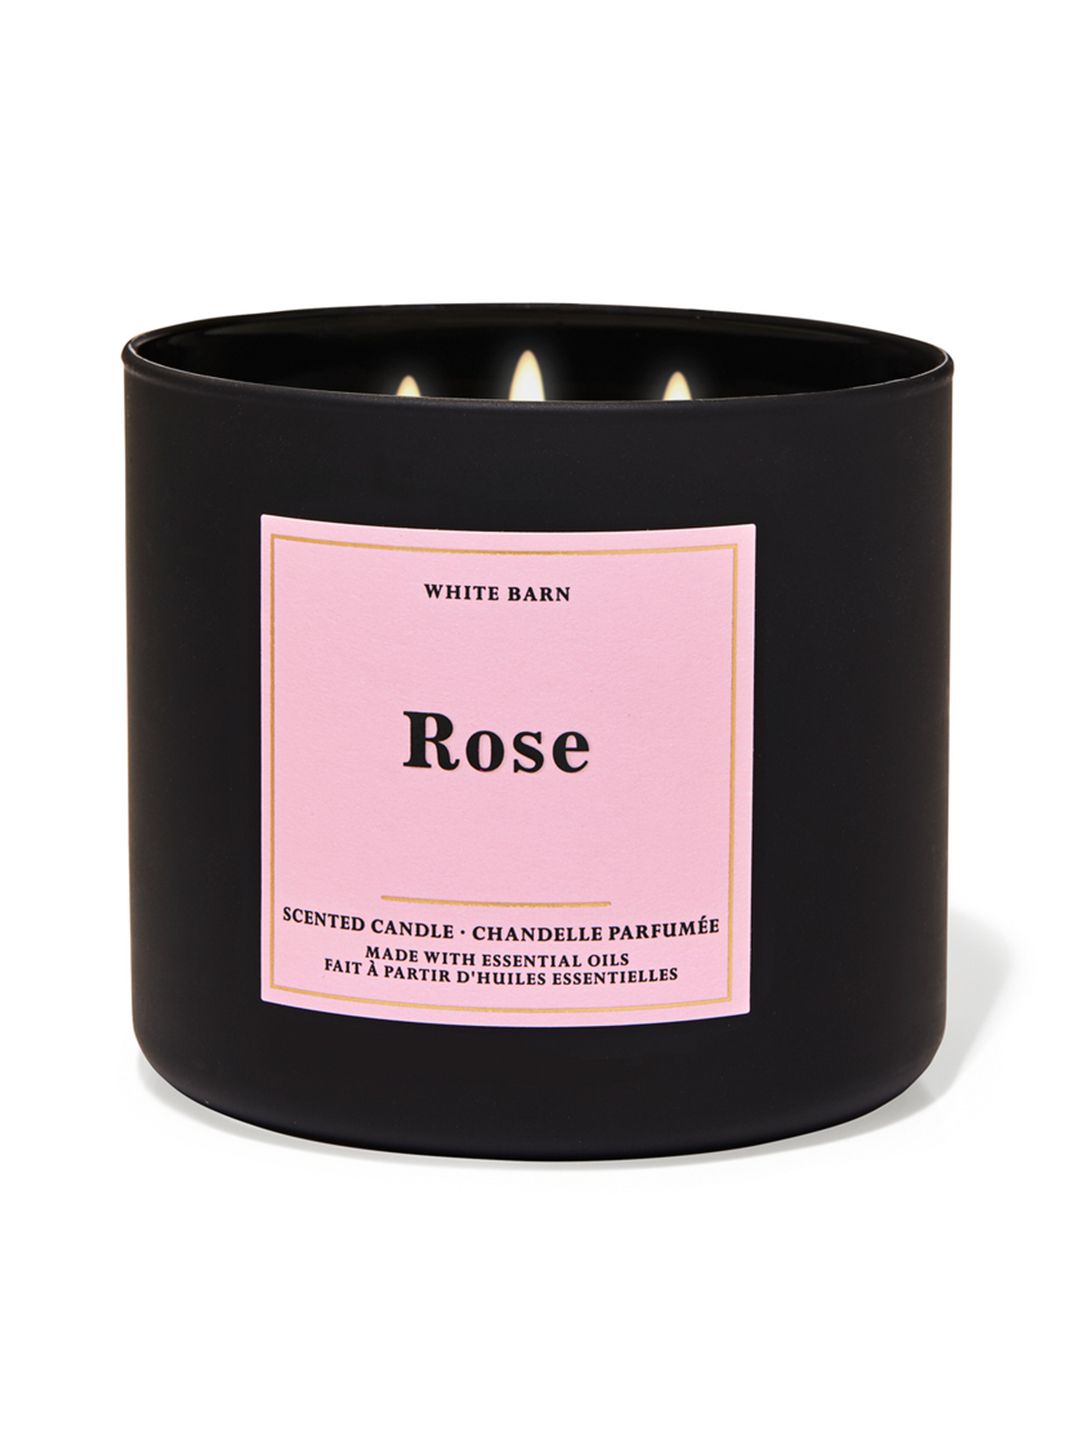 Bath & Body Works Rose 3-Wick Scented Candle - 411g Price in India